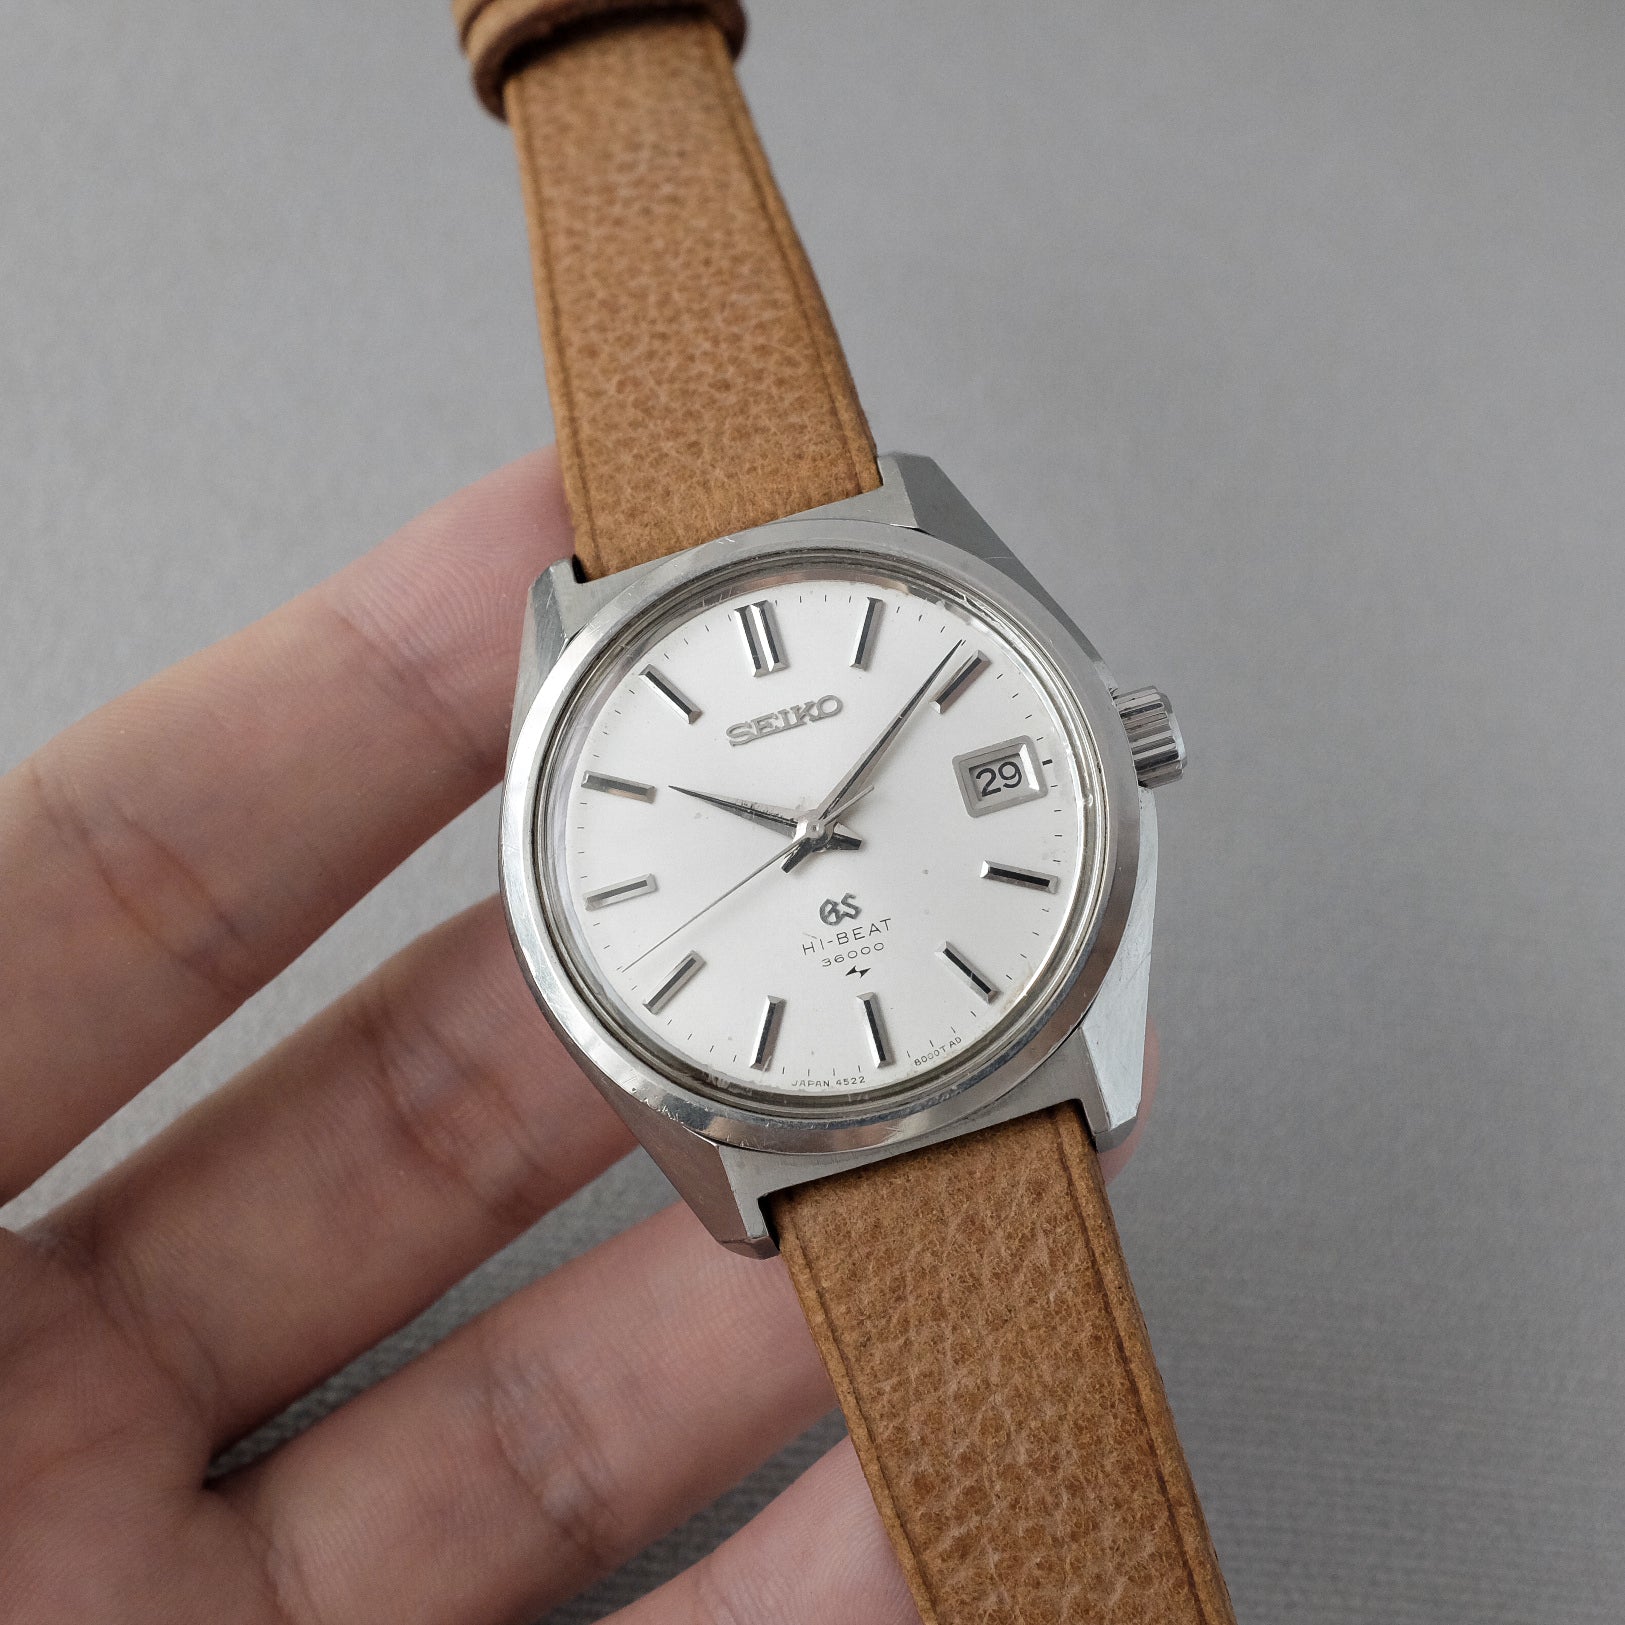 Grand Seiko 4522-8000 from 1968